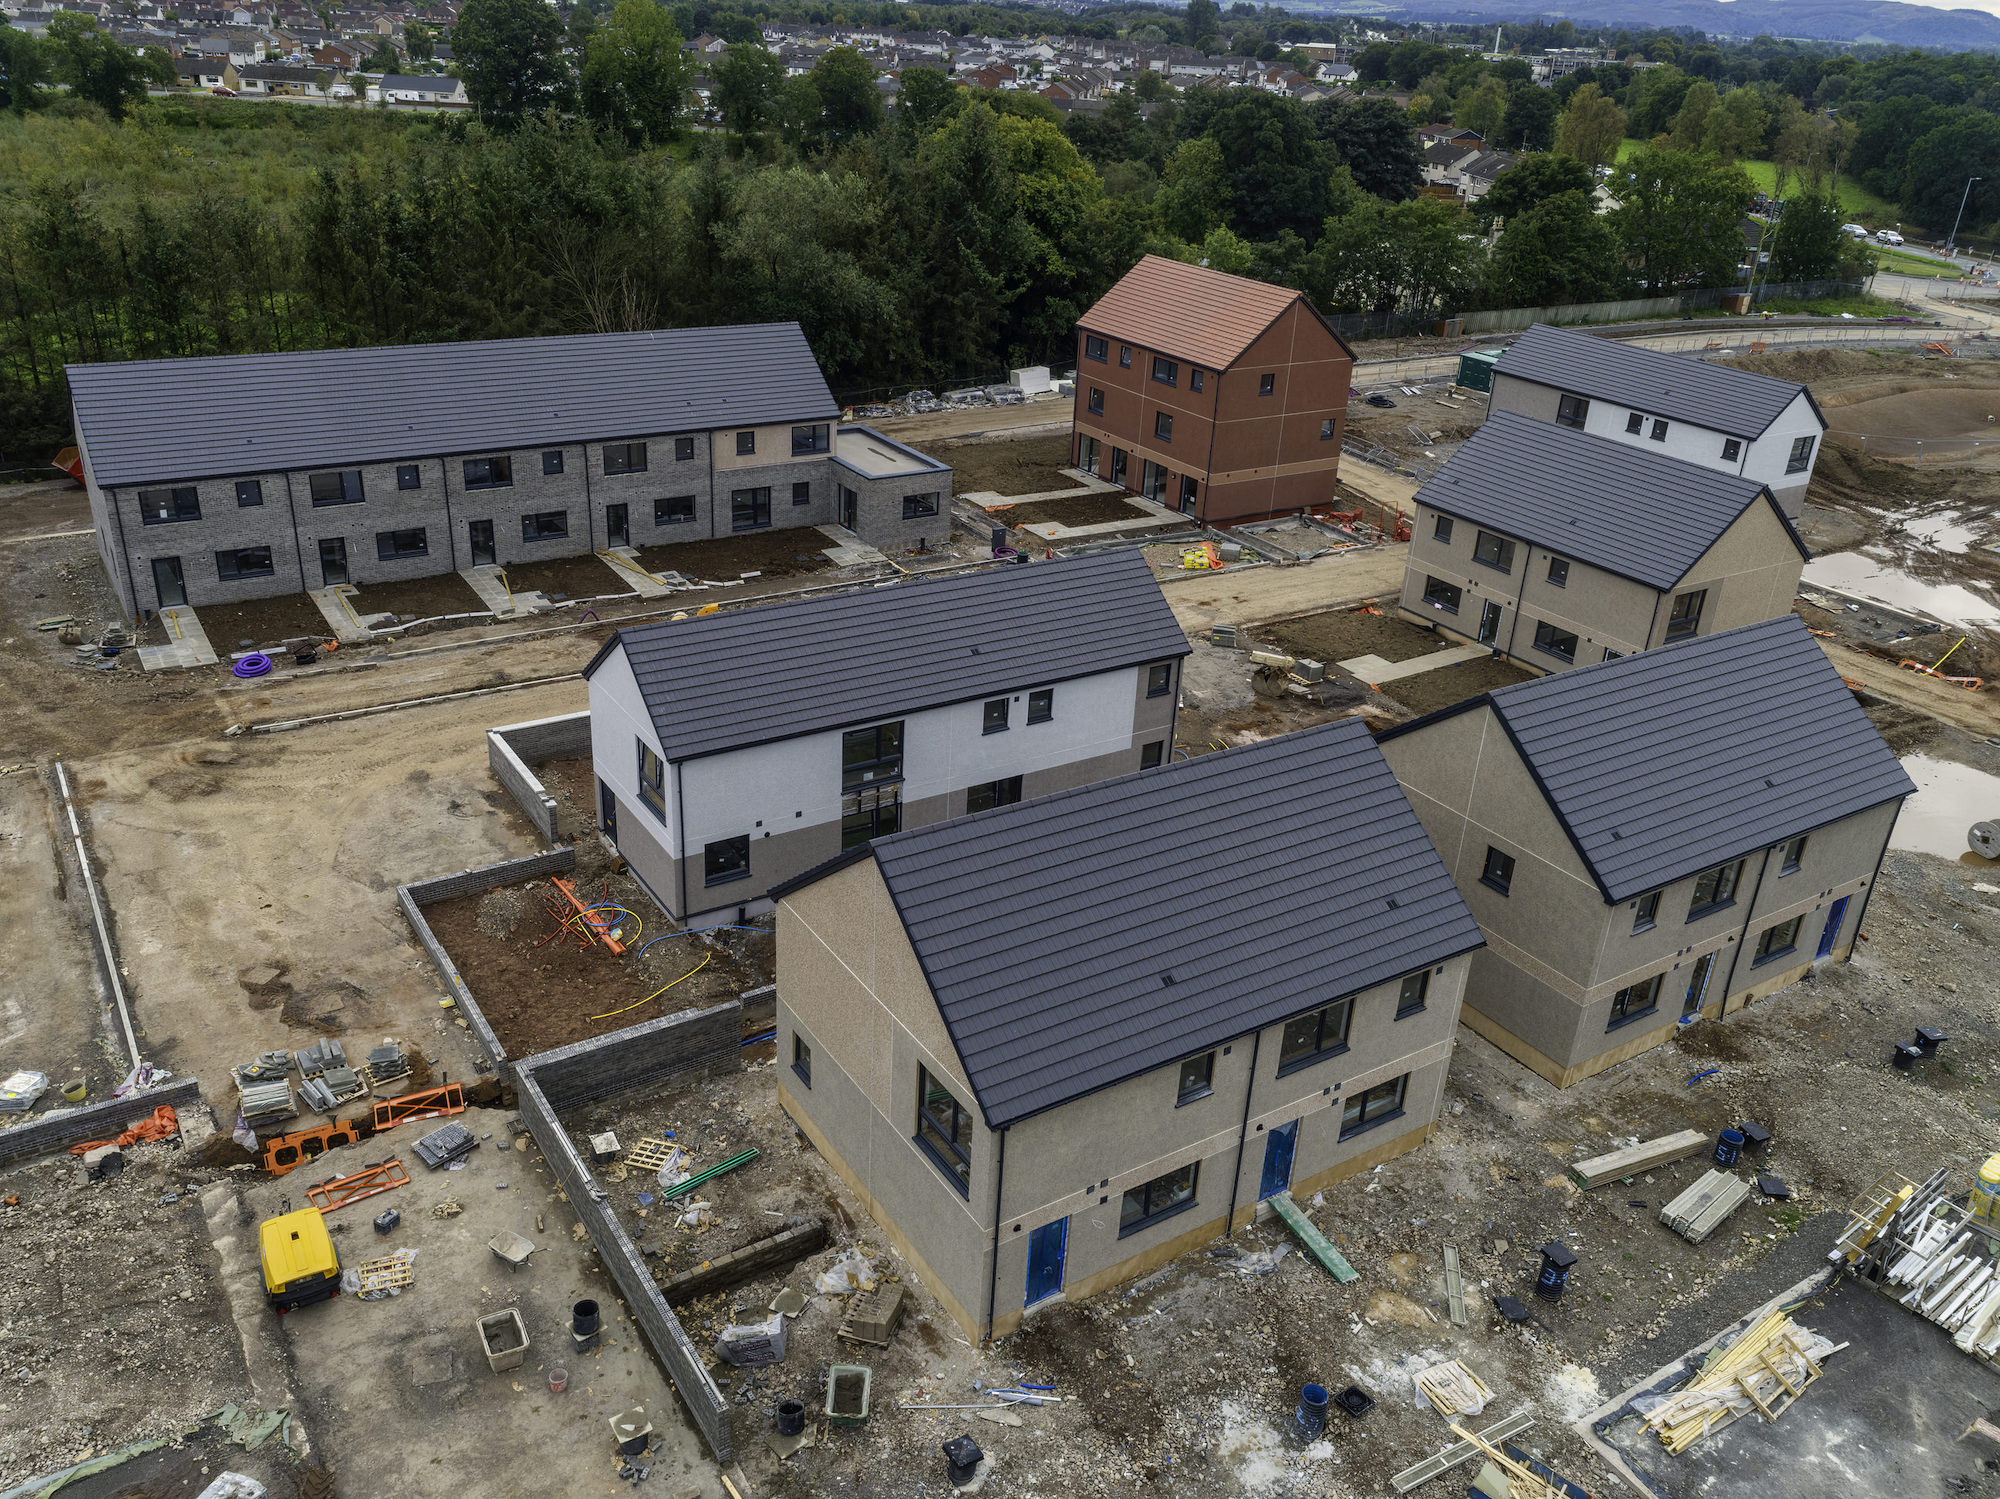 Wheatley to deliver over 800 new affordable homes in Dumfries and Galloway